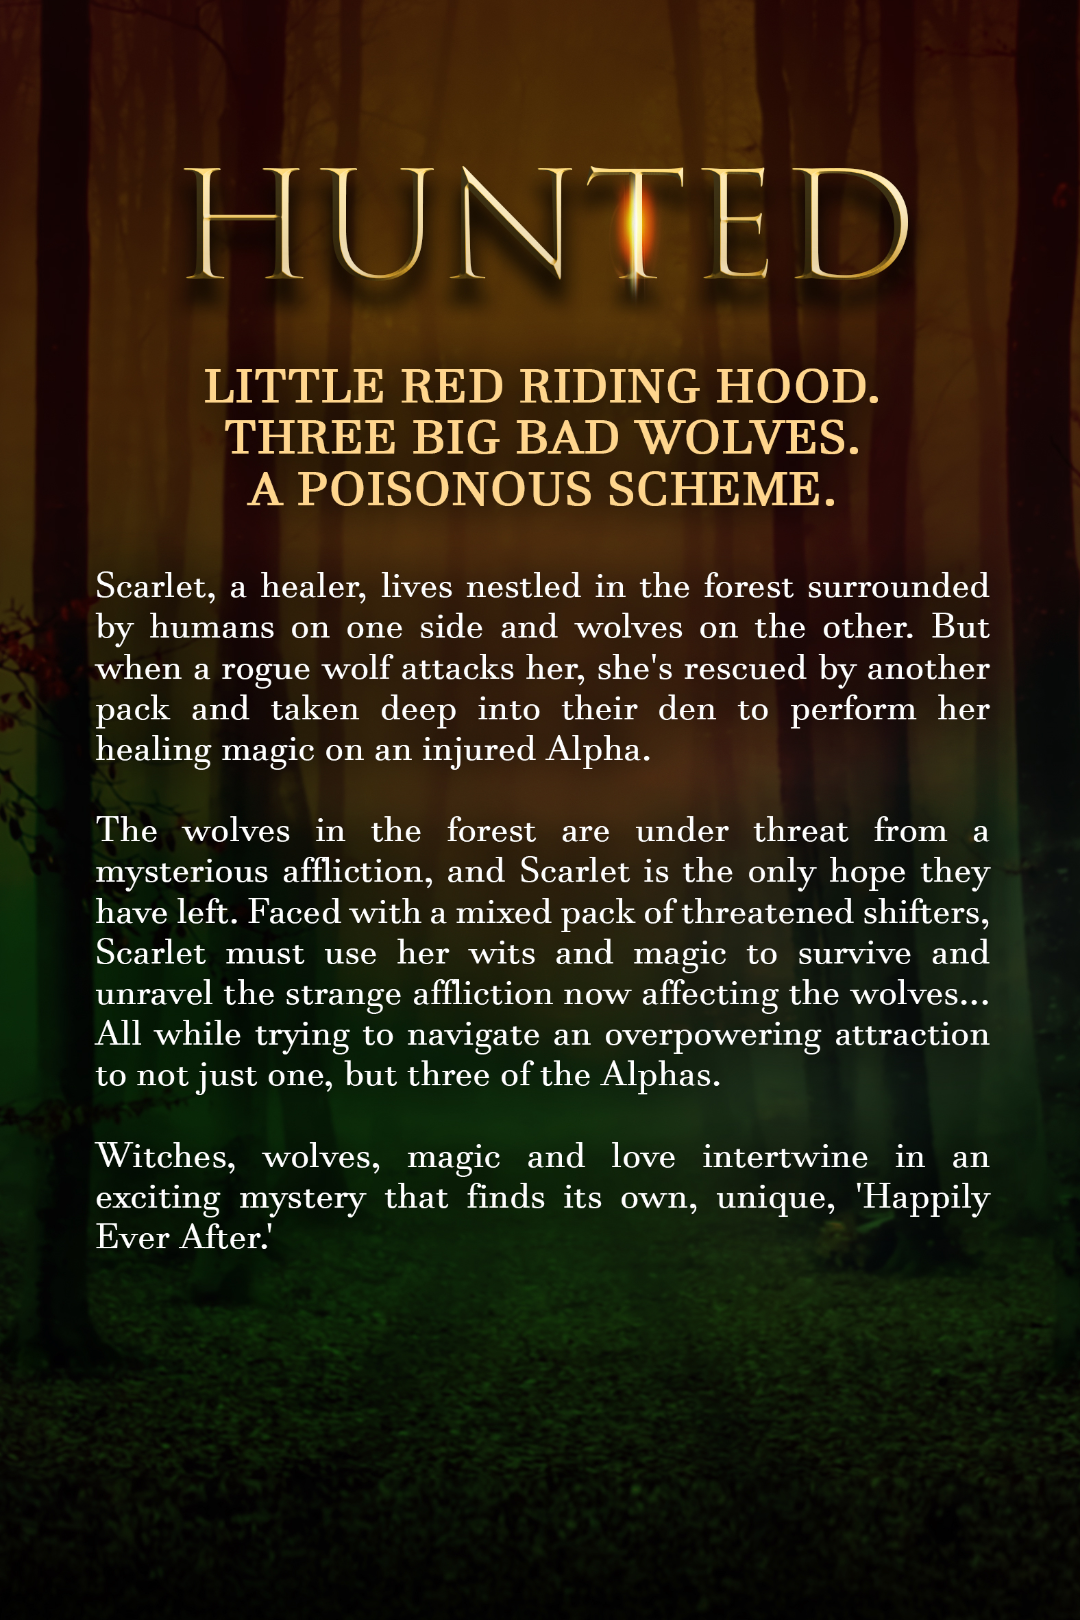 Hunted - Steamy Fairy Tale Retelling - Red Riding Hood